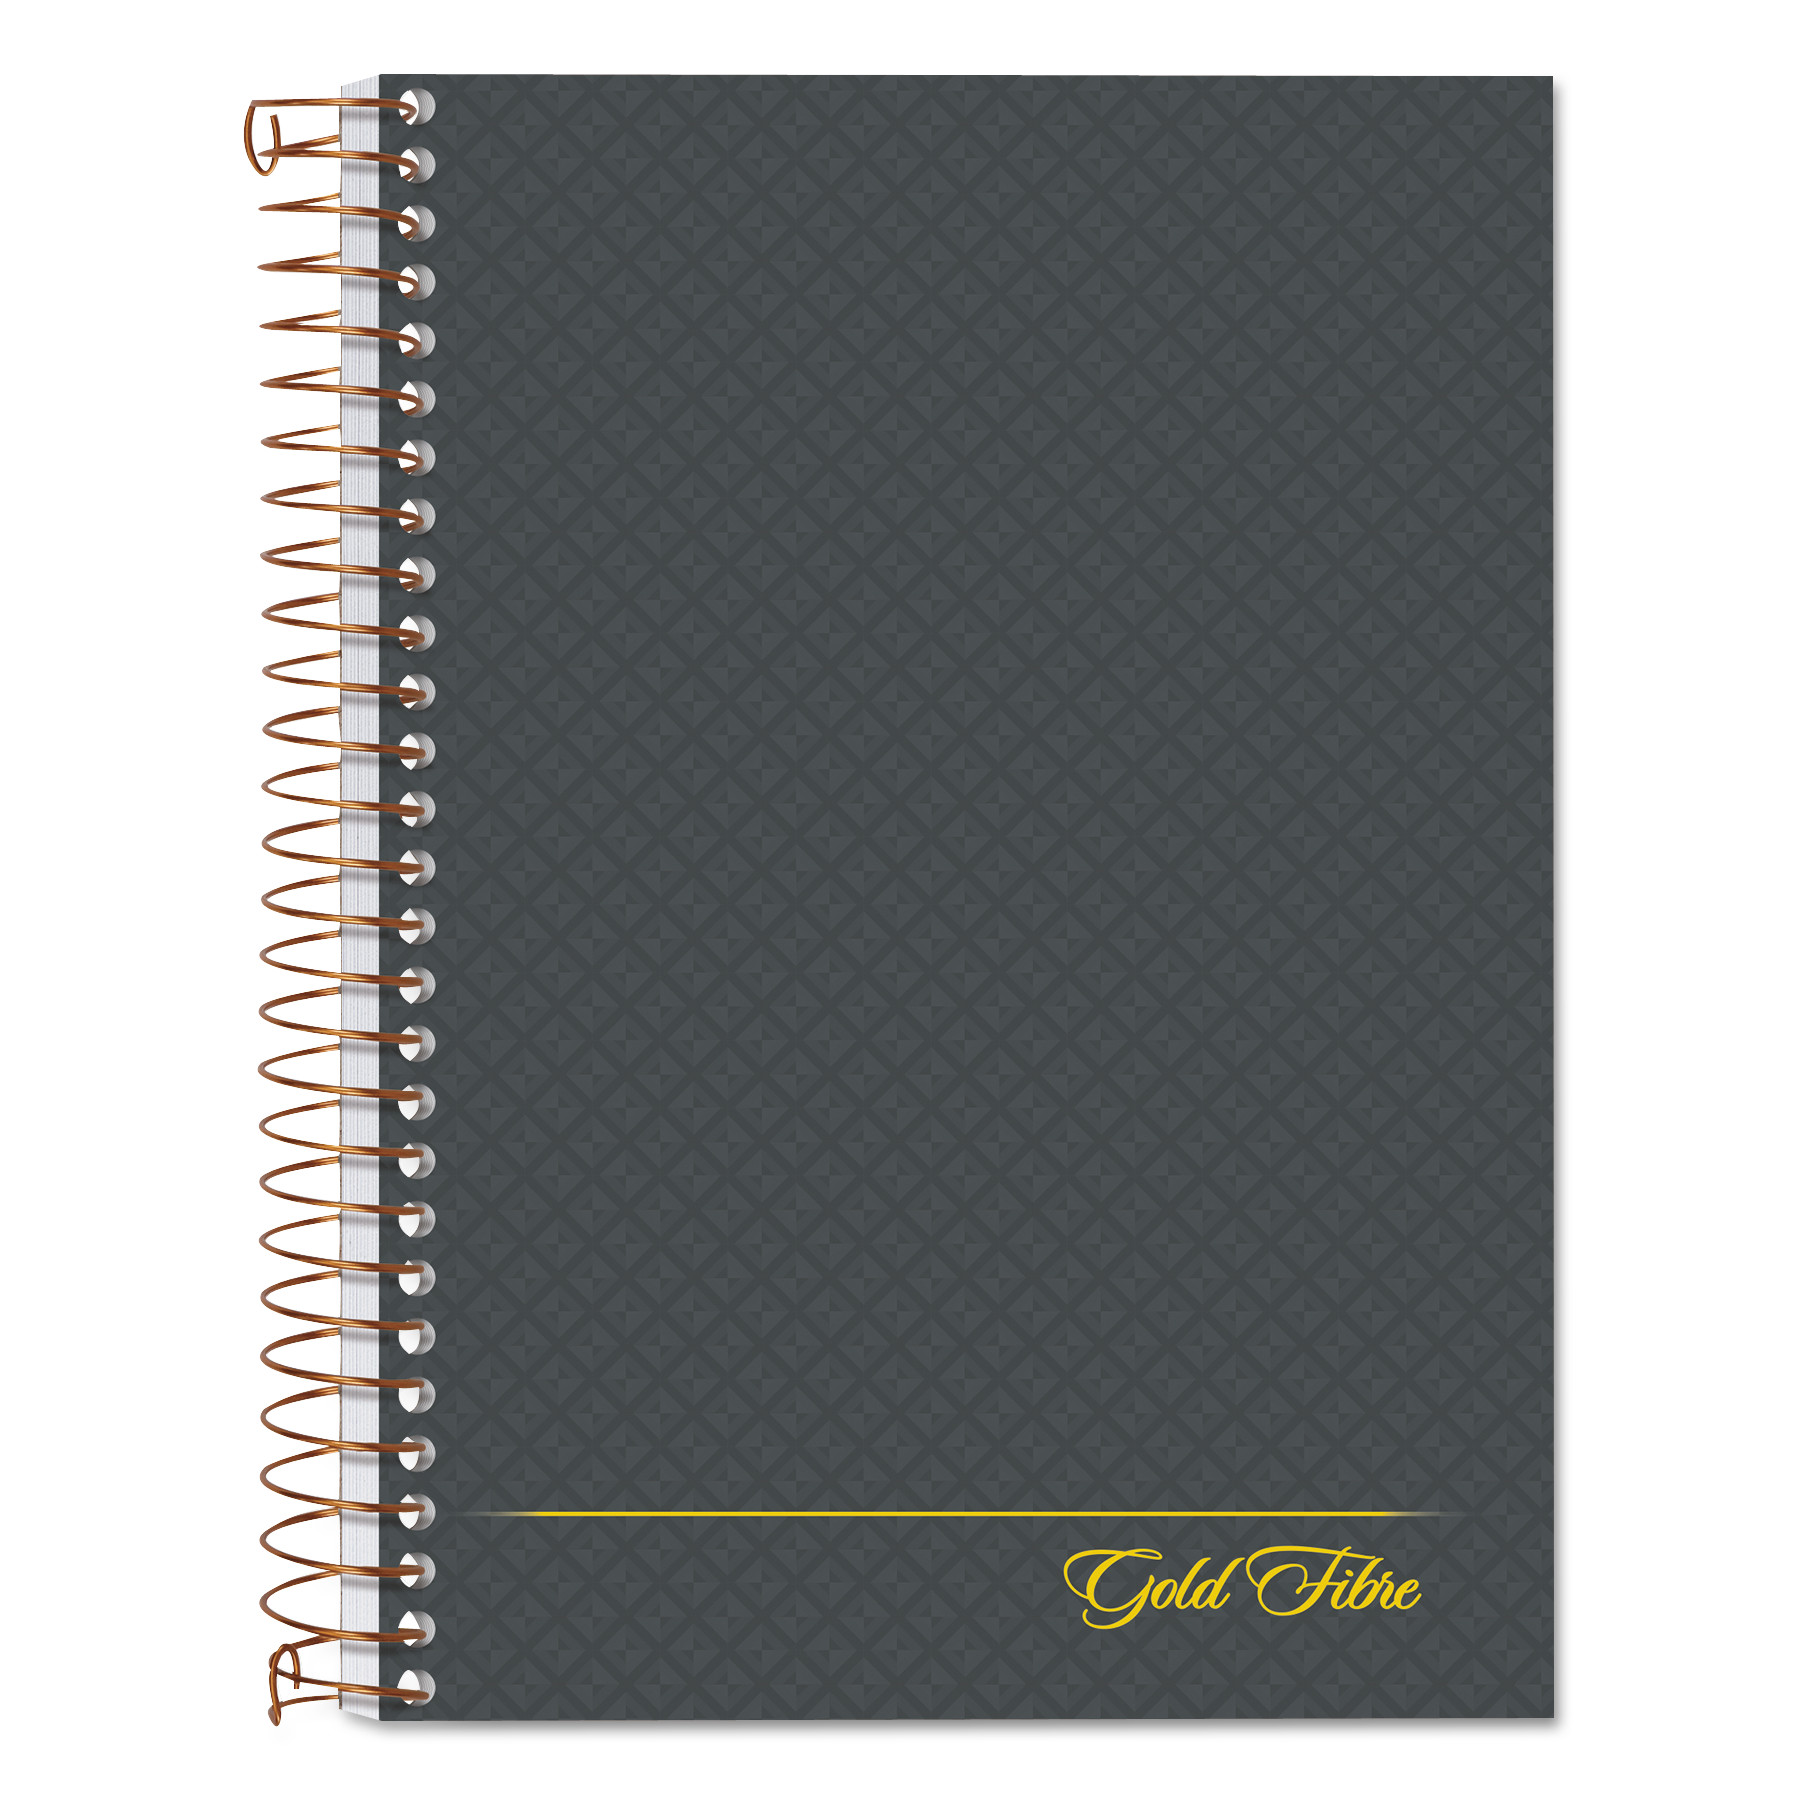  Ampad 20-803R Gold Fibre Personal Notebooks, 1 Subject, Medium/College Rule, Designer Gray Cover, 7 x 5, 100 Sheets (TOP20803) 